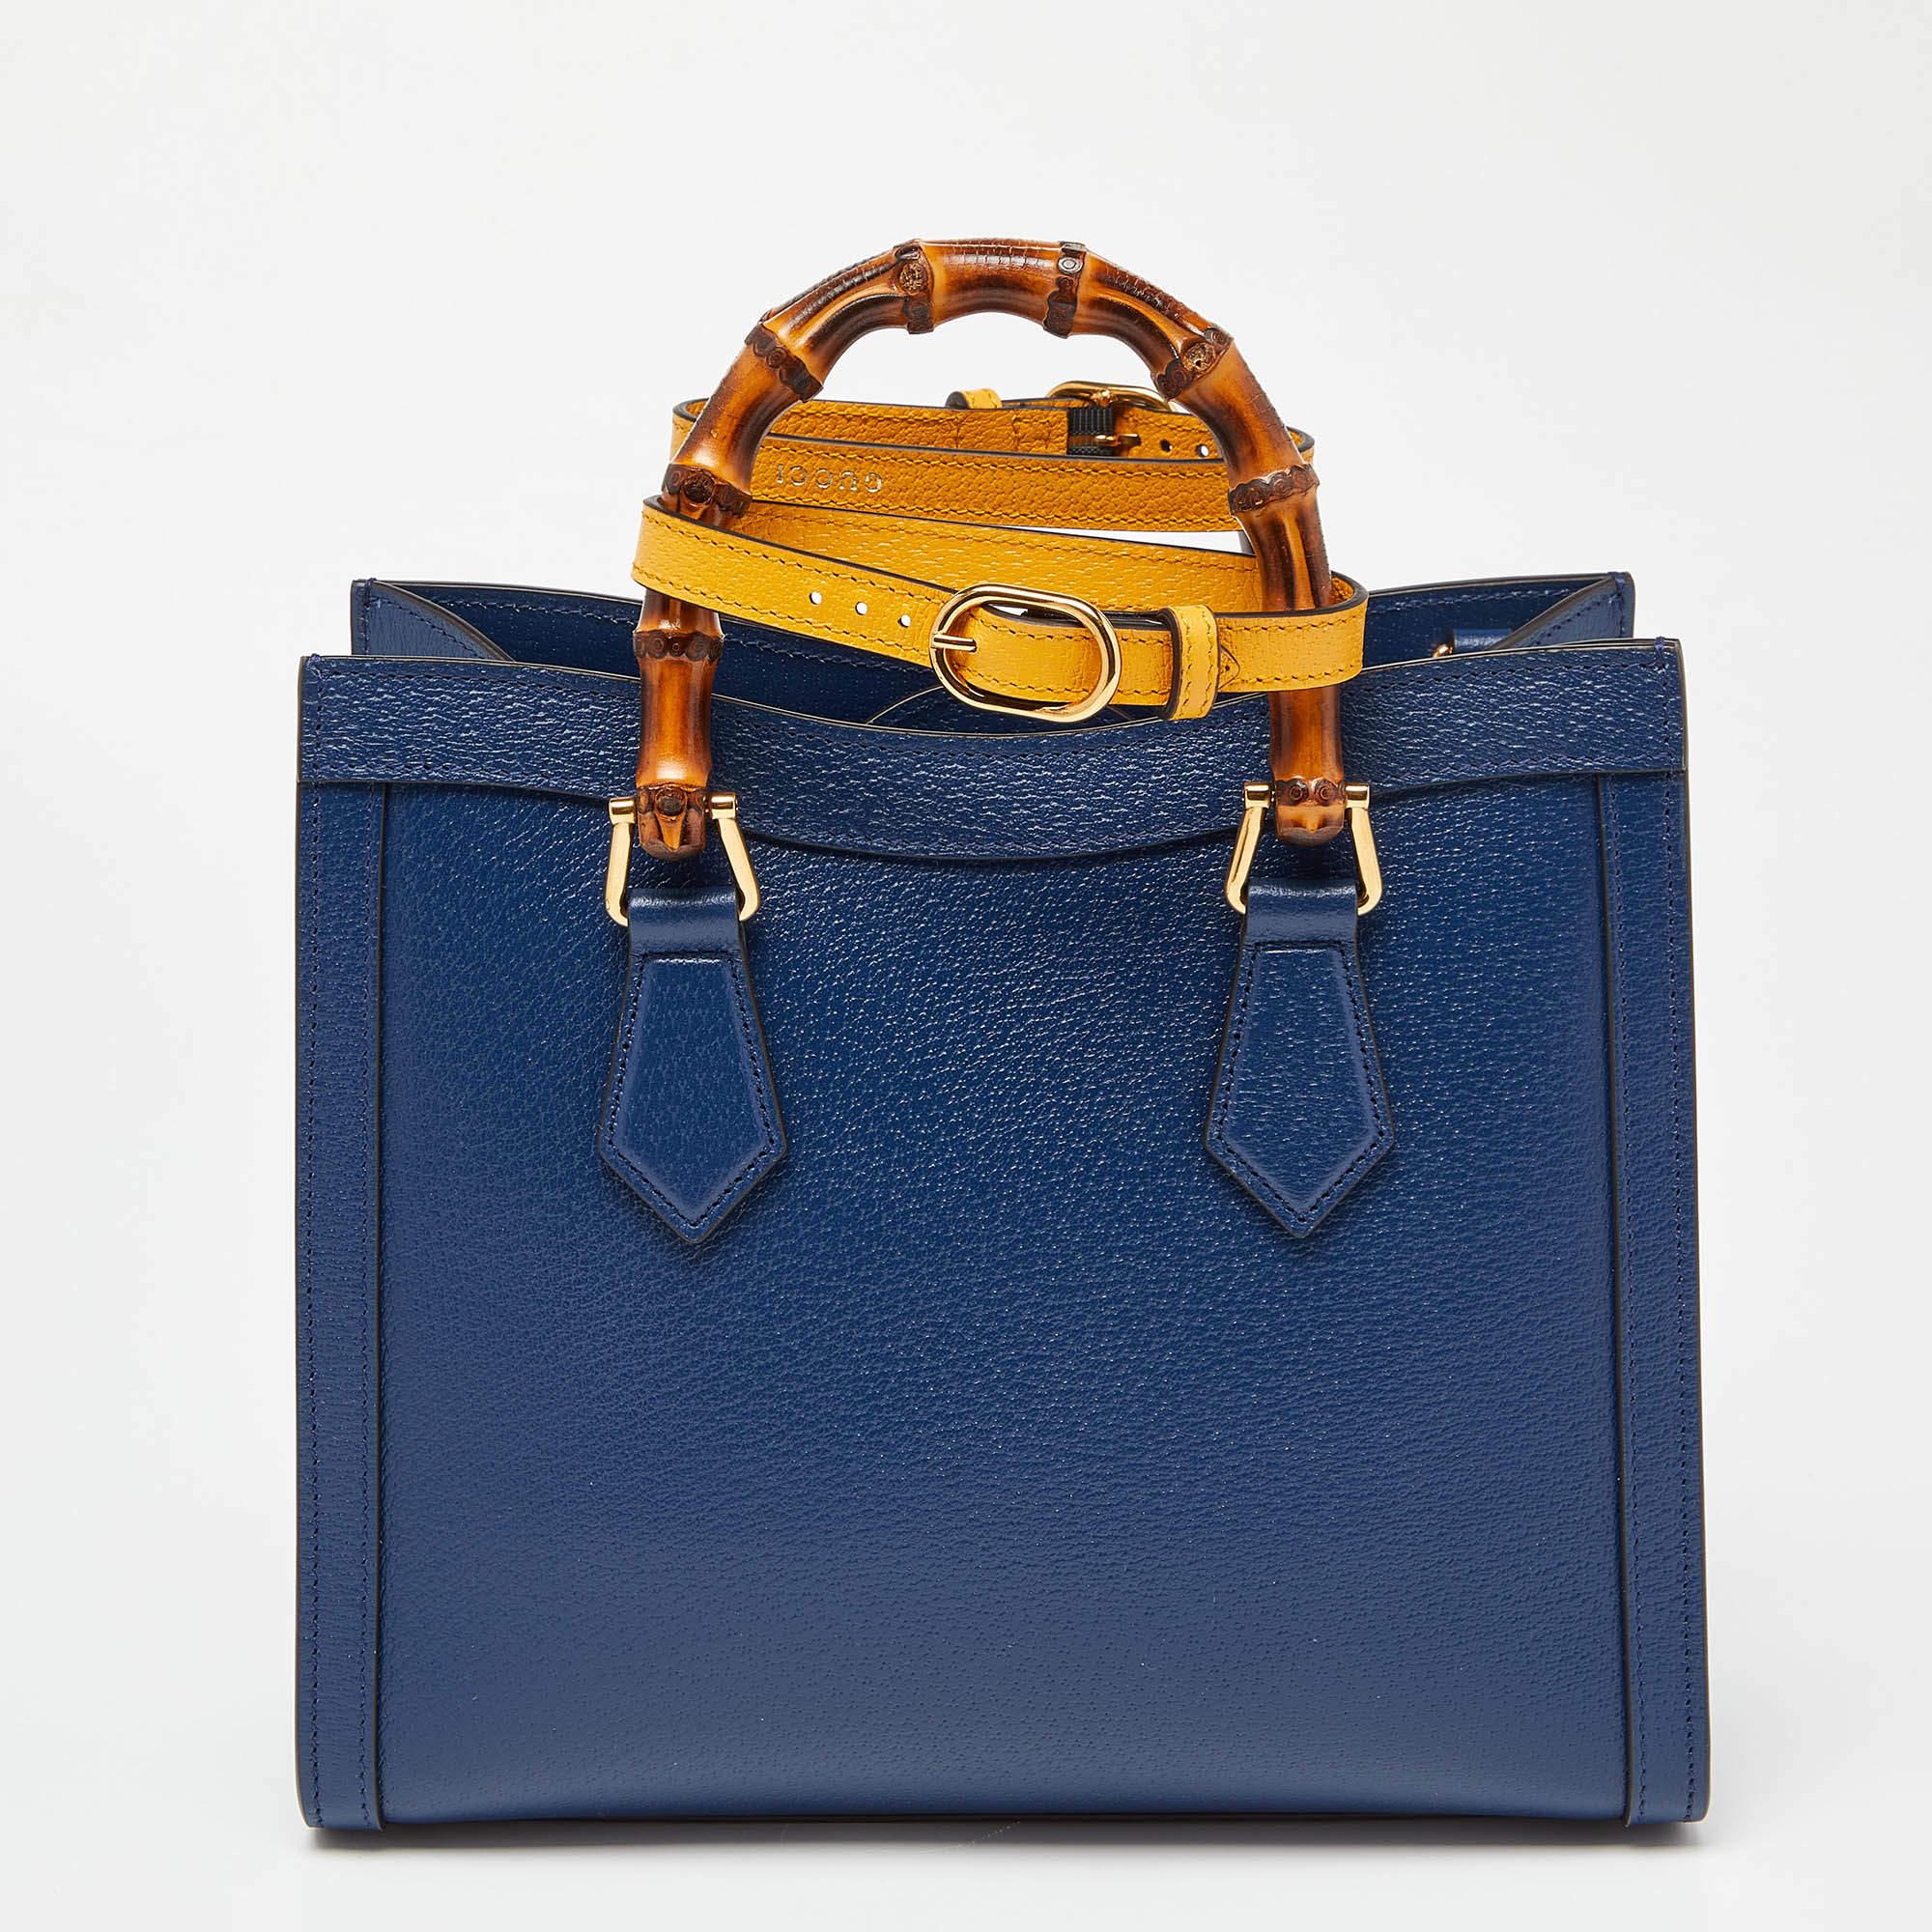 You are going to love owning this Diana tote from Gucci as it is well-made and brimming with luxury. The Diana tote has been crafted from leather and lined with Alcantara on the insides. It has a navy blue shade and two bamboo handles for you to